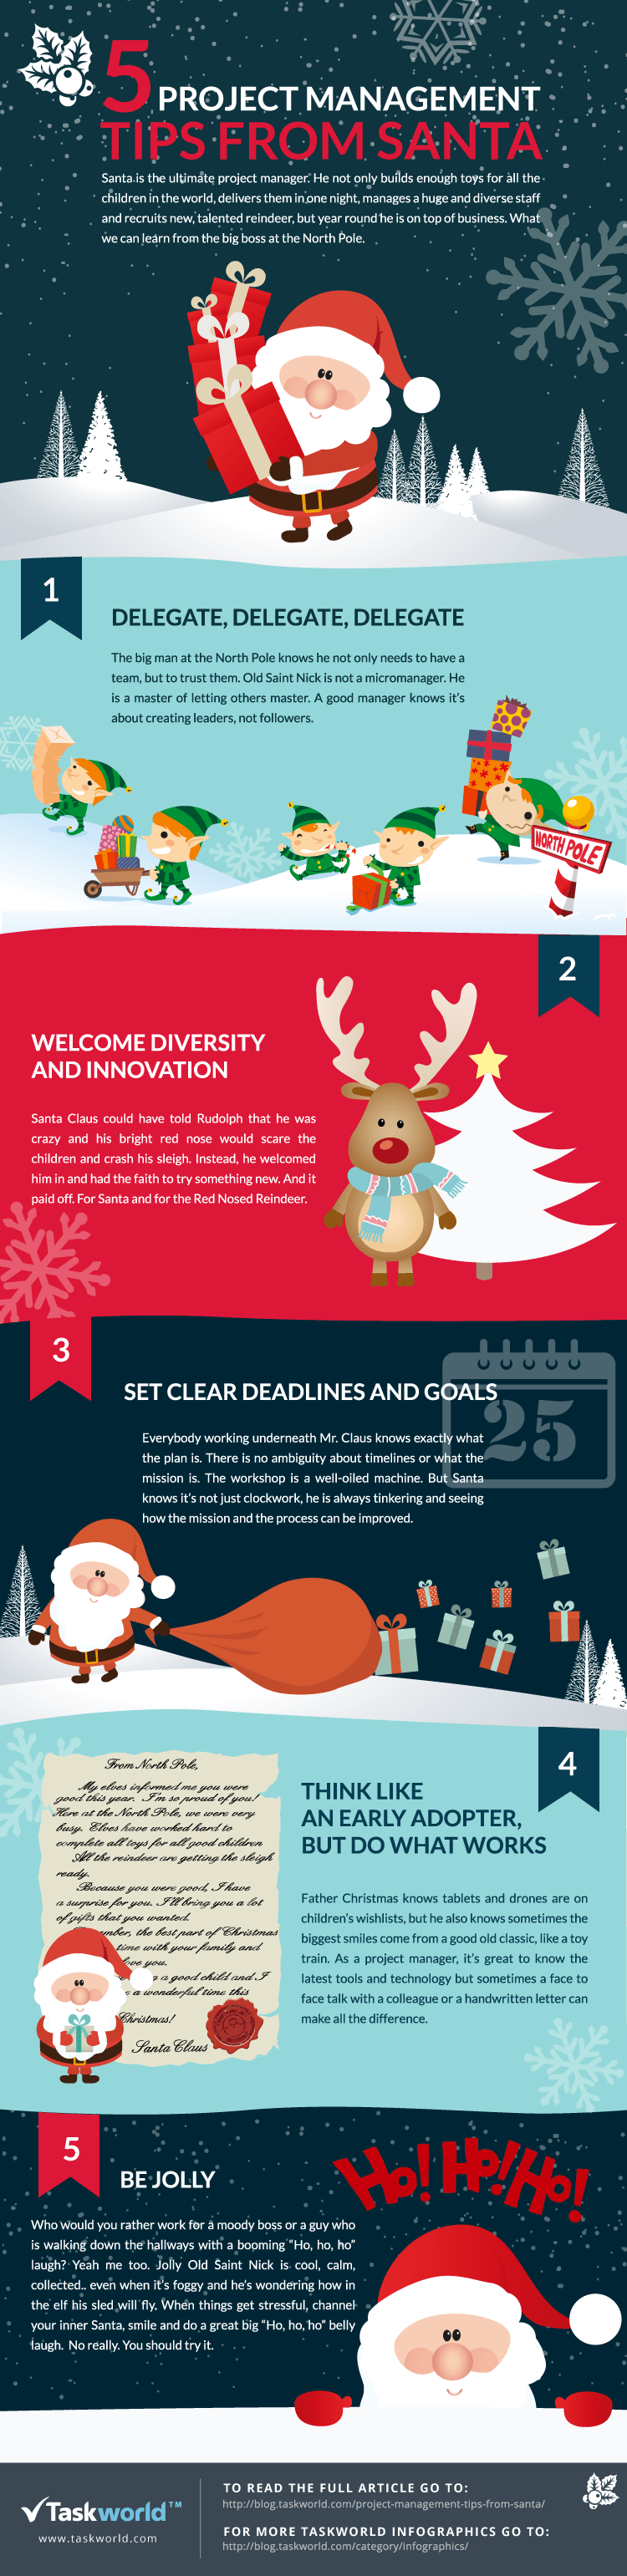 5-project-managementn-tips-from-santa1